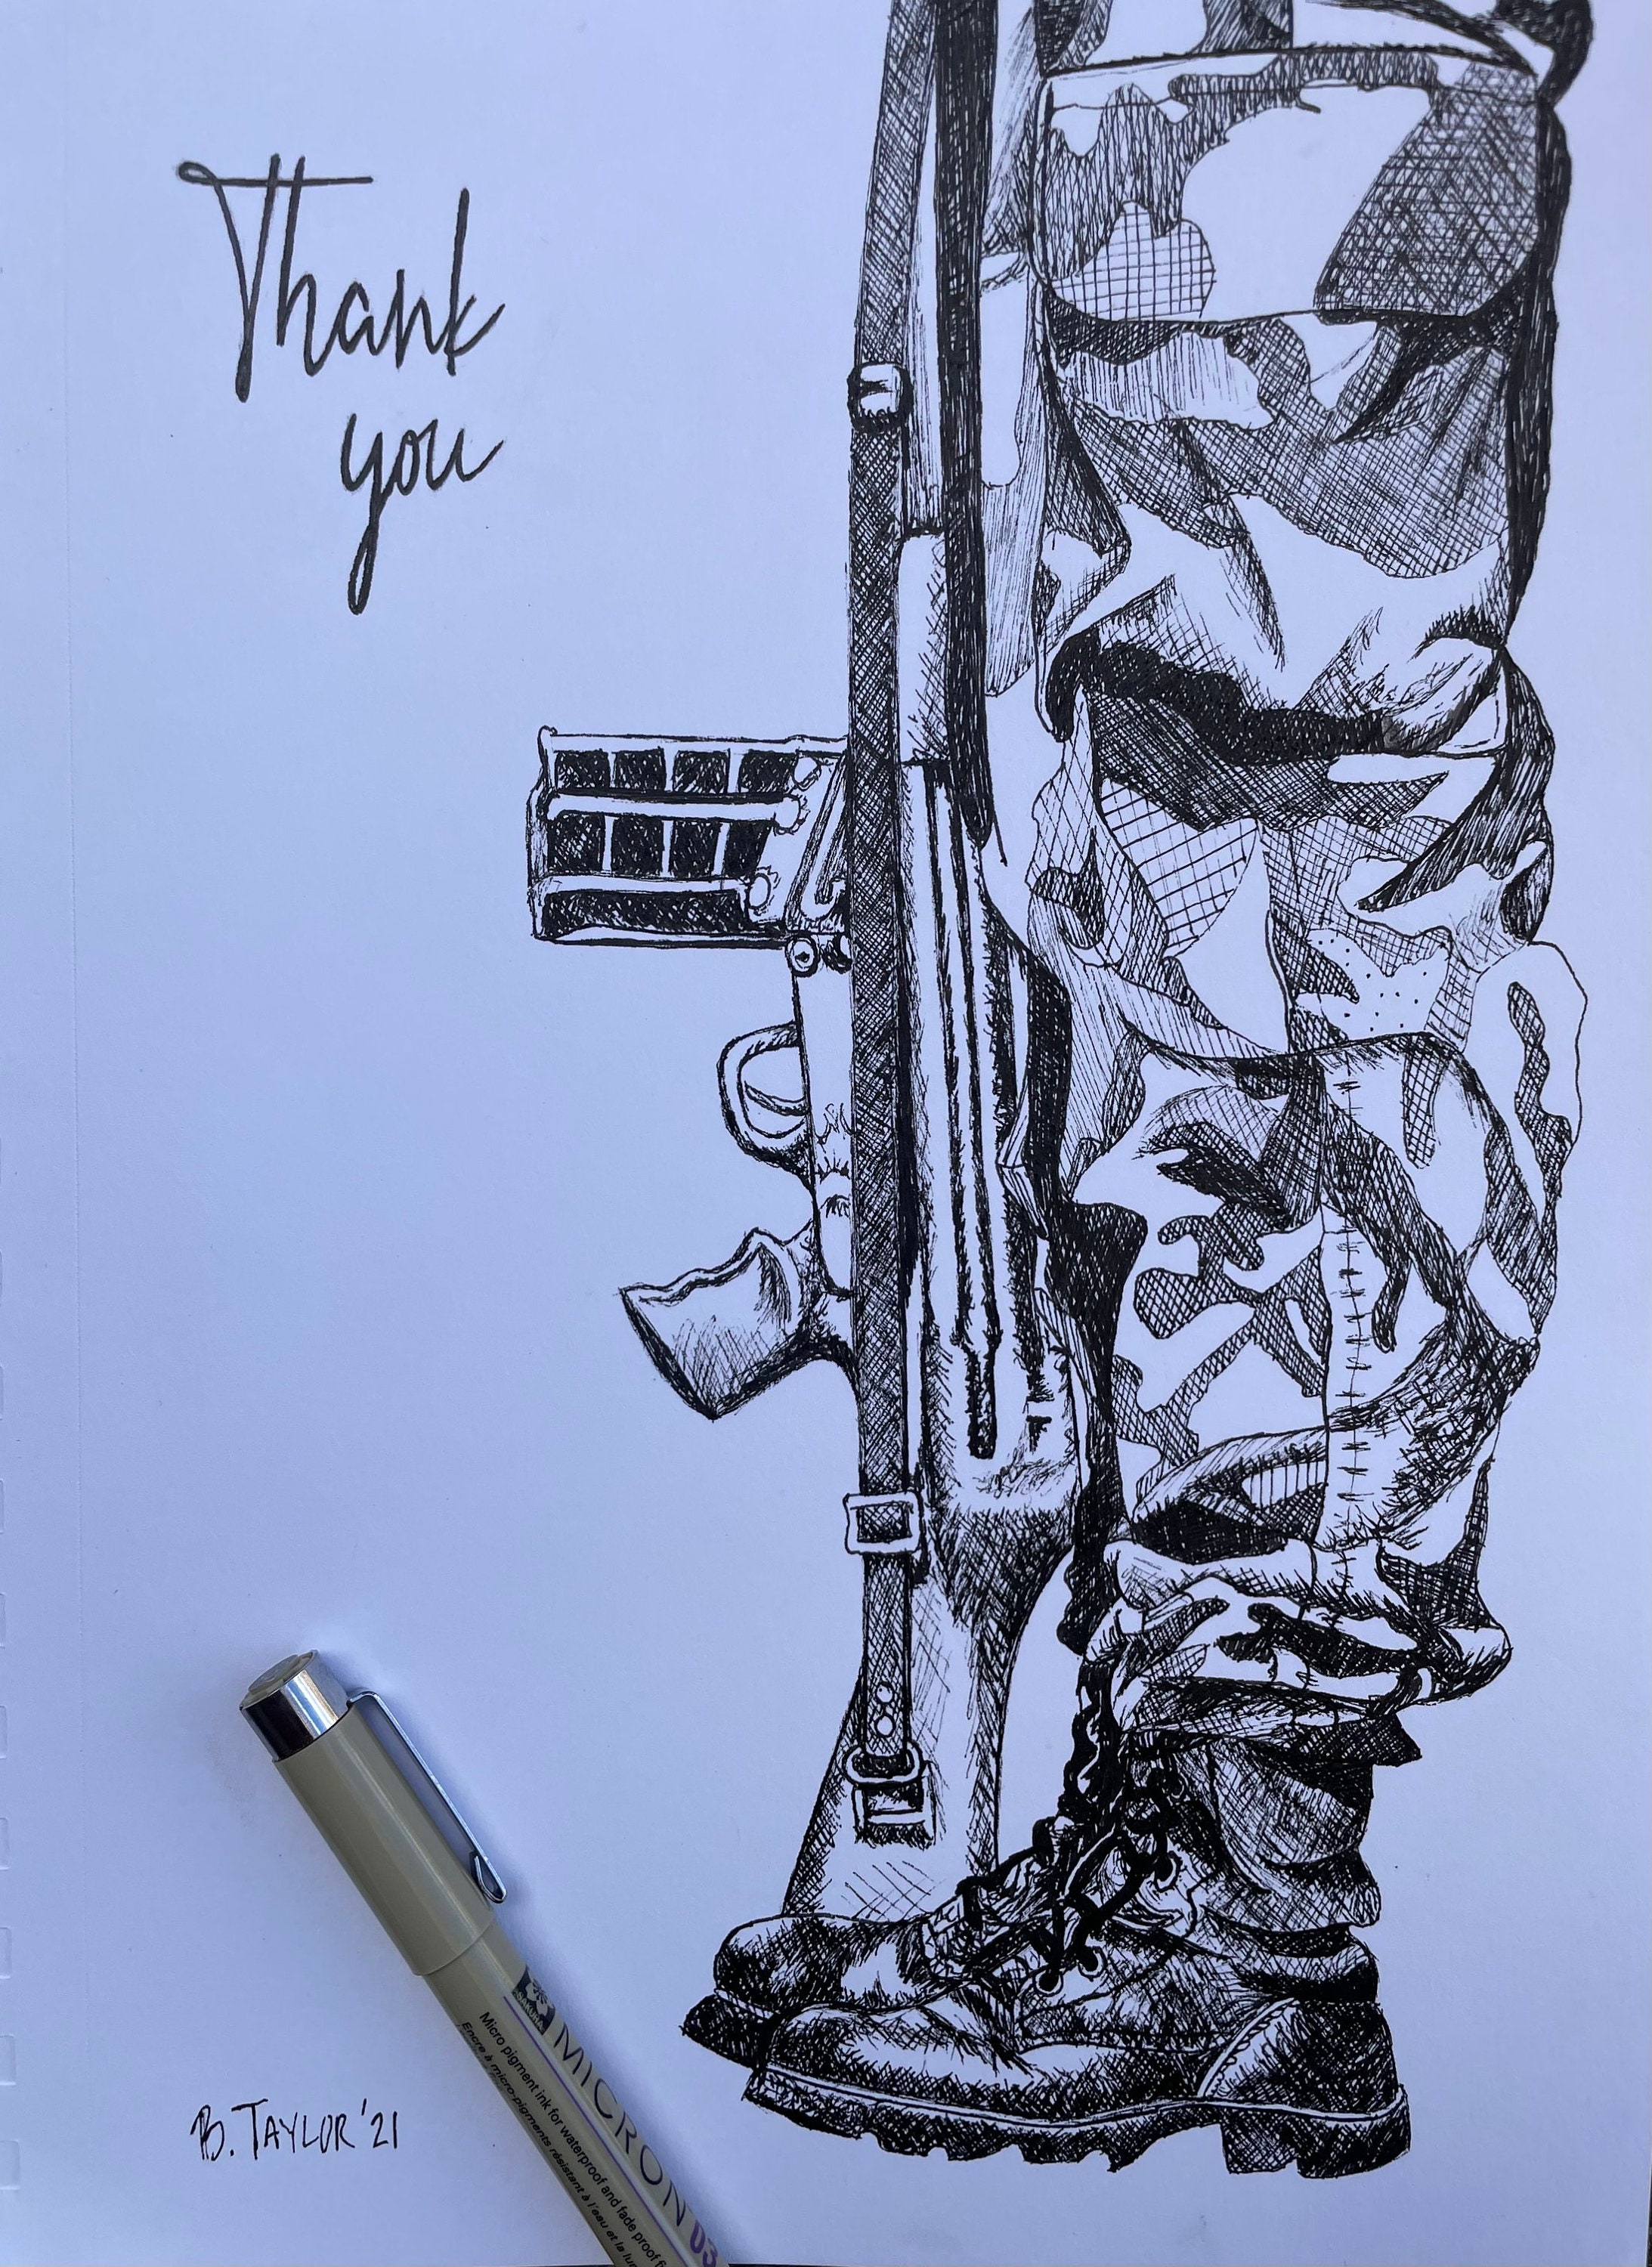 veterans day sketches